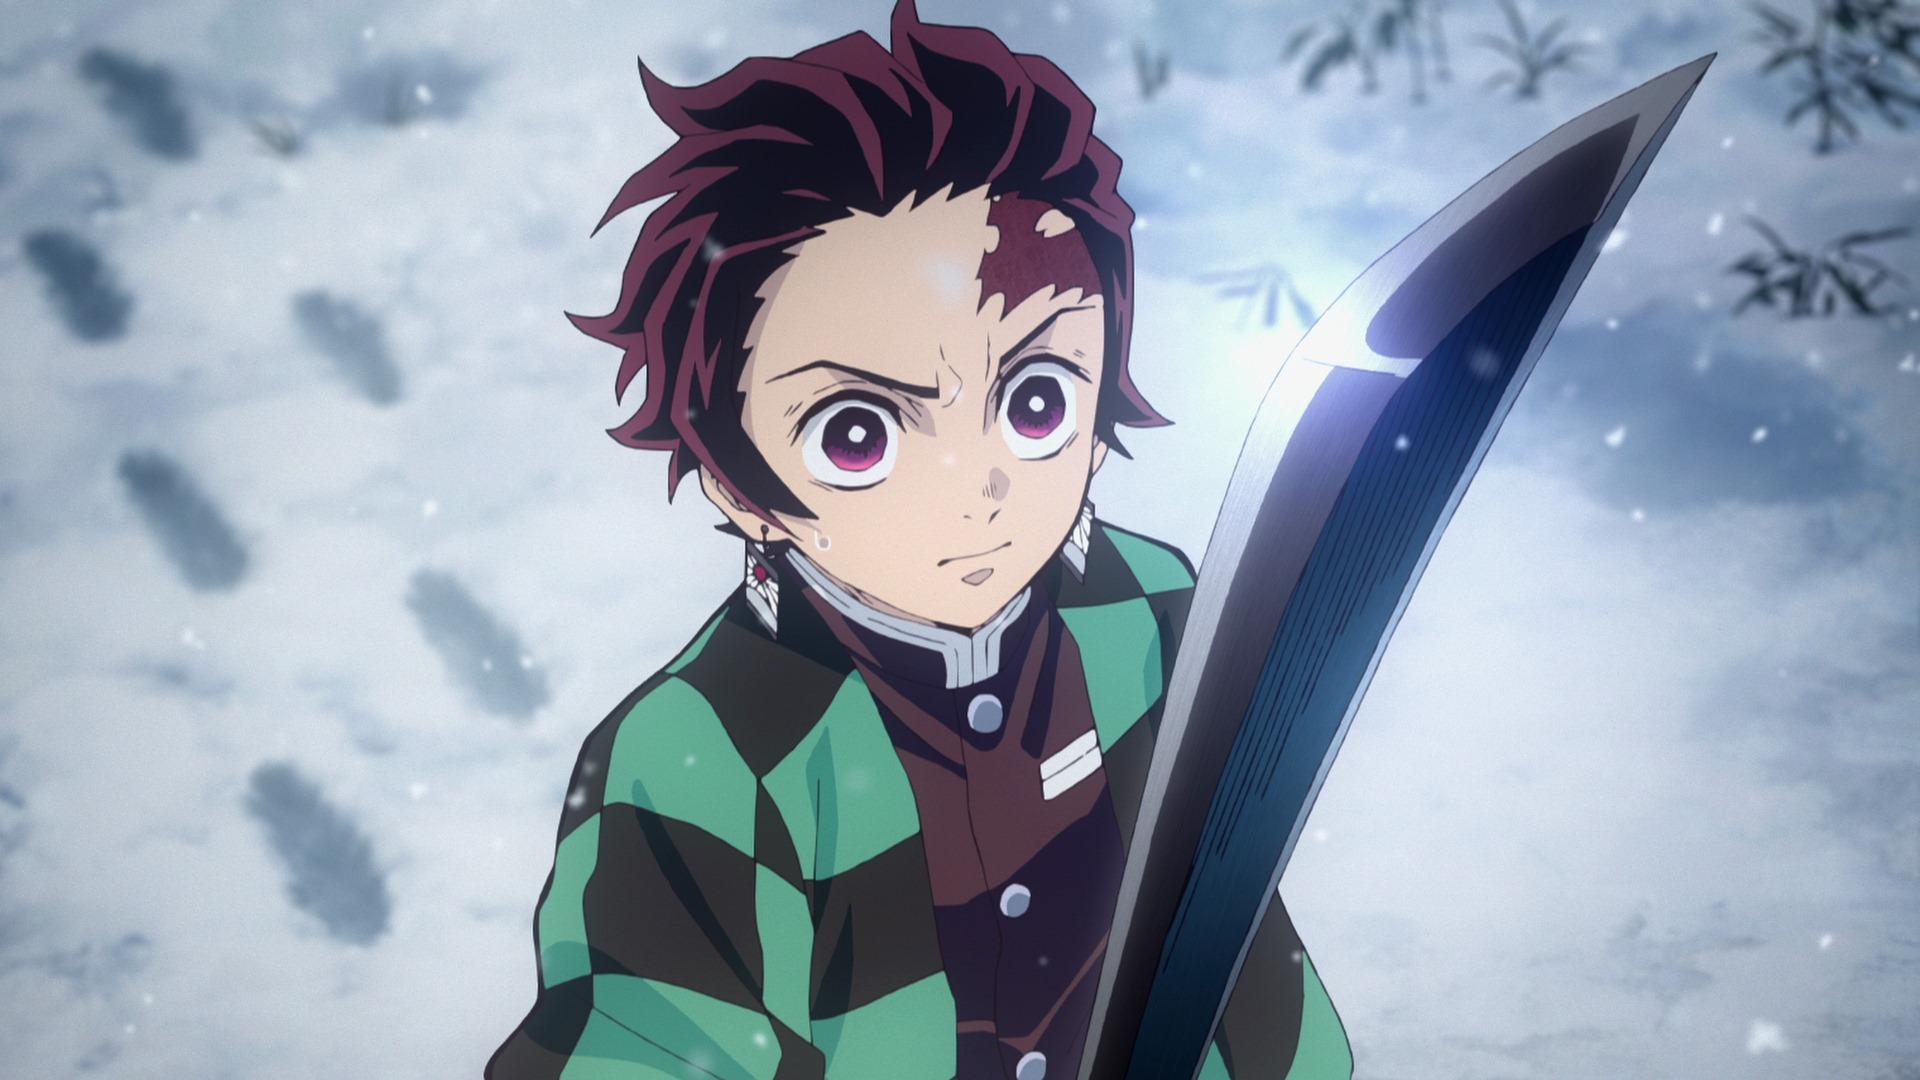 Demon Slayer The Movie: Mugen Train' is arriving on Netflix this